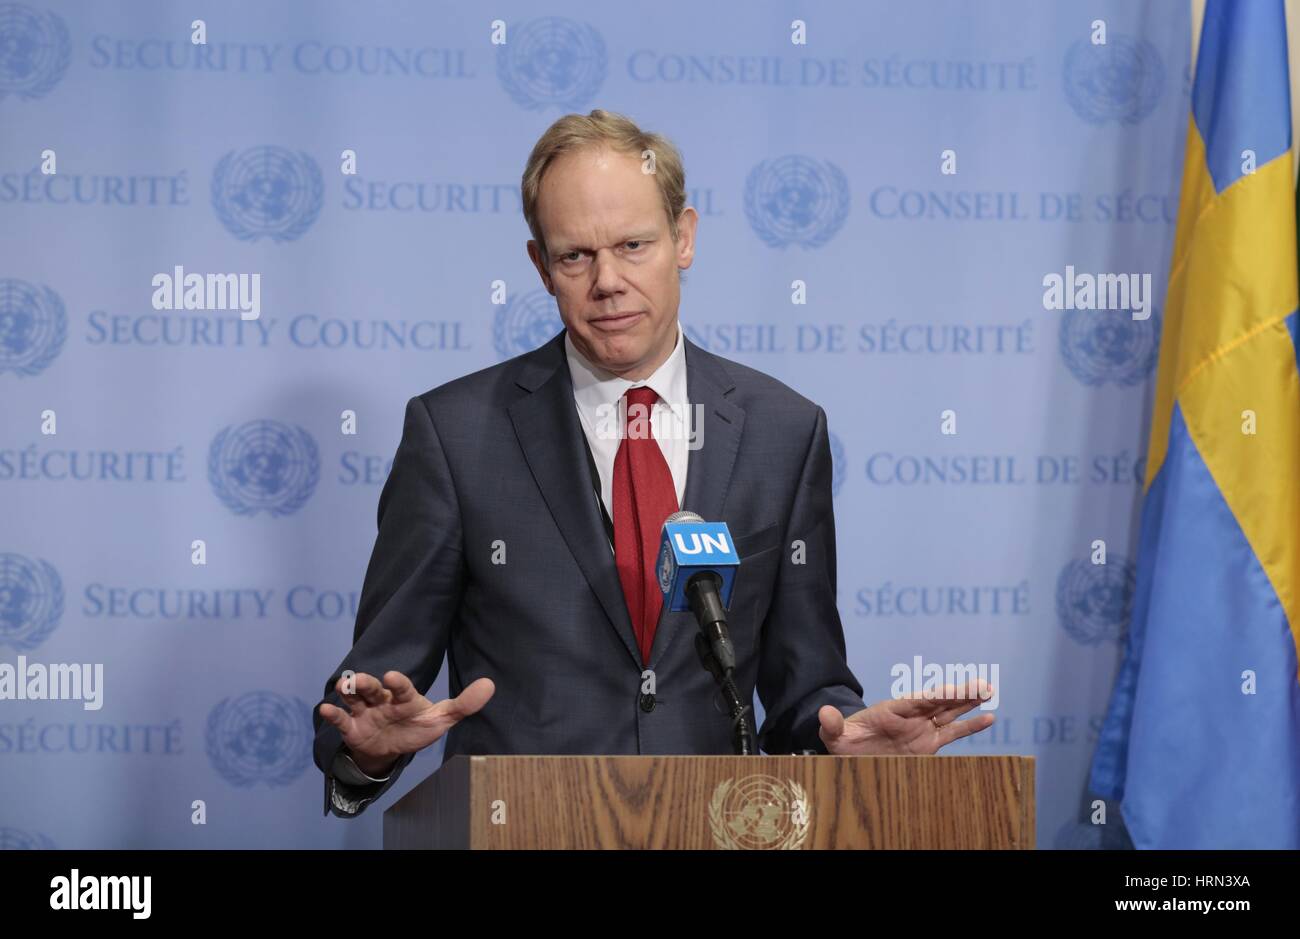 United Nations, New York, USA, 28 February 2017 - Ambassador Matthew Rycroft Permanent Representative of UK to the UN after the Russian Security Council Veto on the Syrian Chemical Weapons attack on there Civilian Population today at the UN Headquarters in New York. Photo: Luiz Rampelotto/EuropaNewswire | usage worldwide Stock Photo